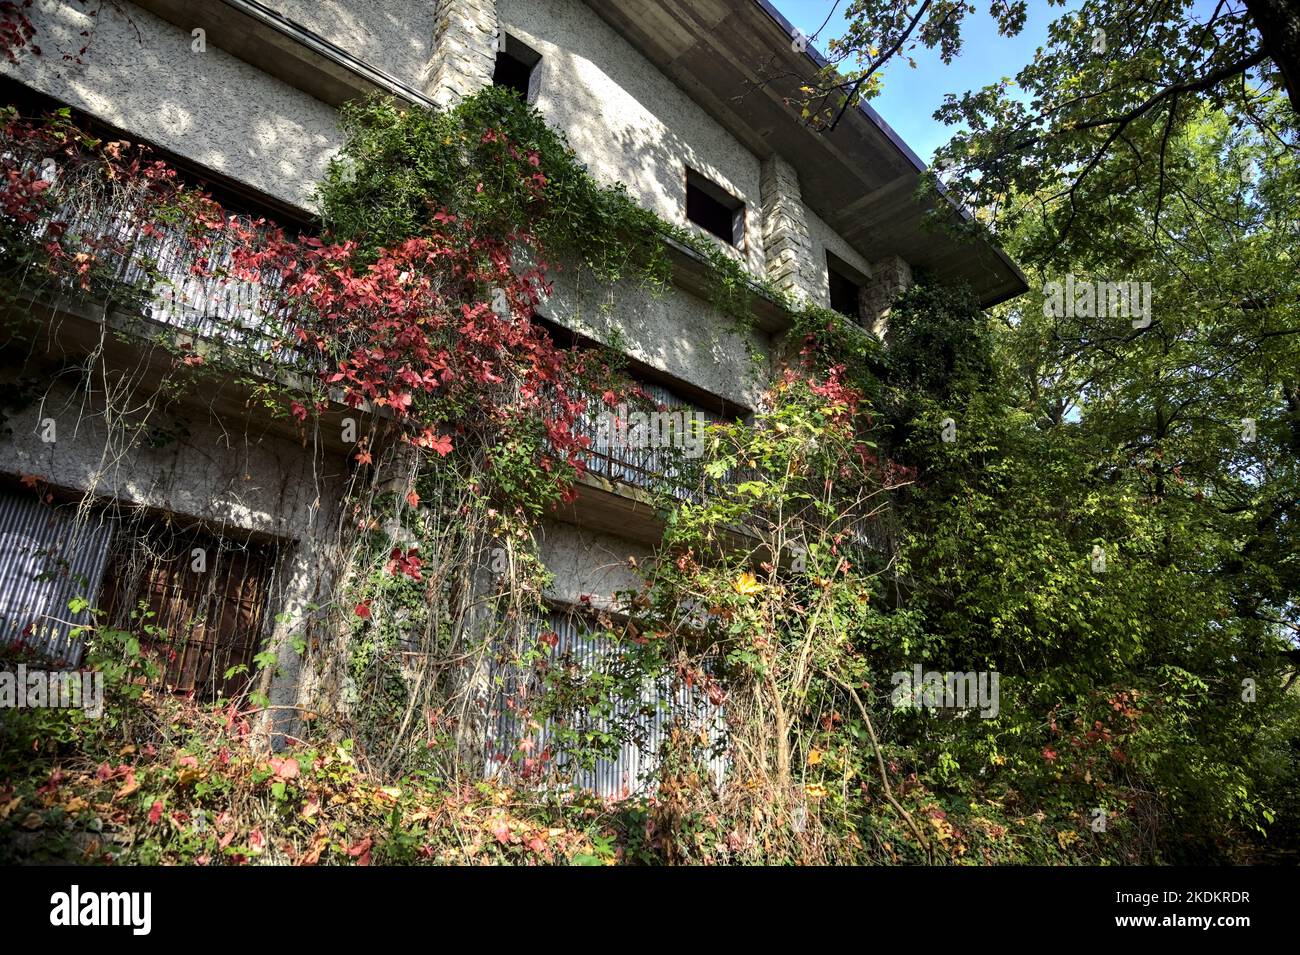 Facade  of an abandoned building in a forest with ivy growing on a balcony Stock Photo